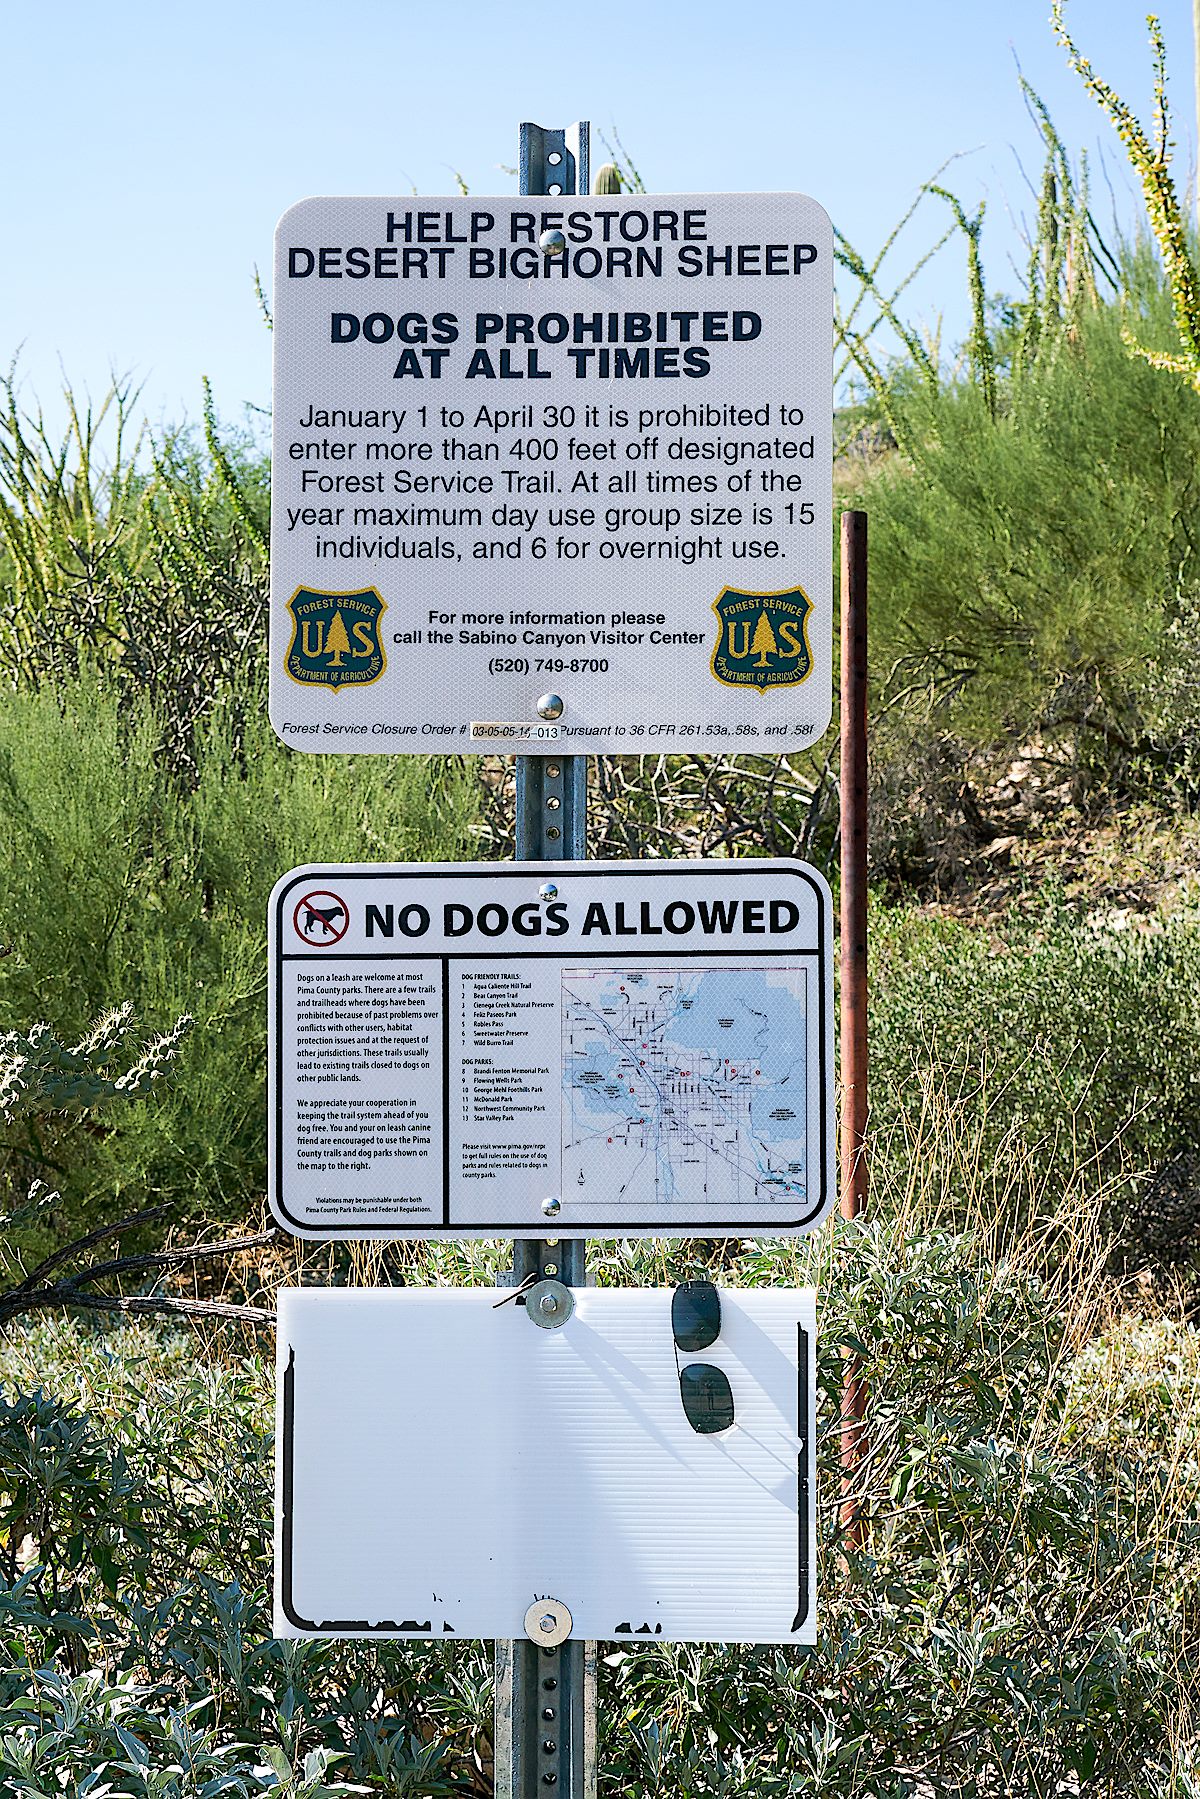 Trail sign at the start of the trail. August 2017.